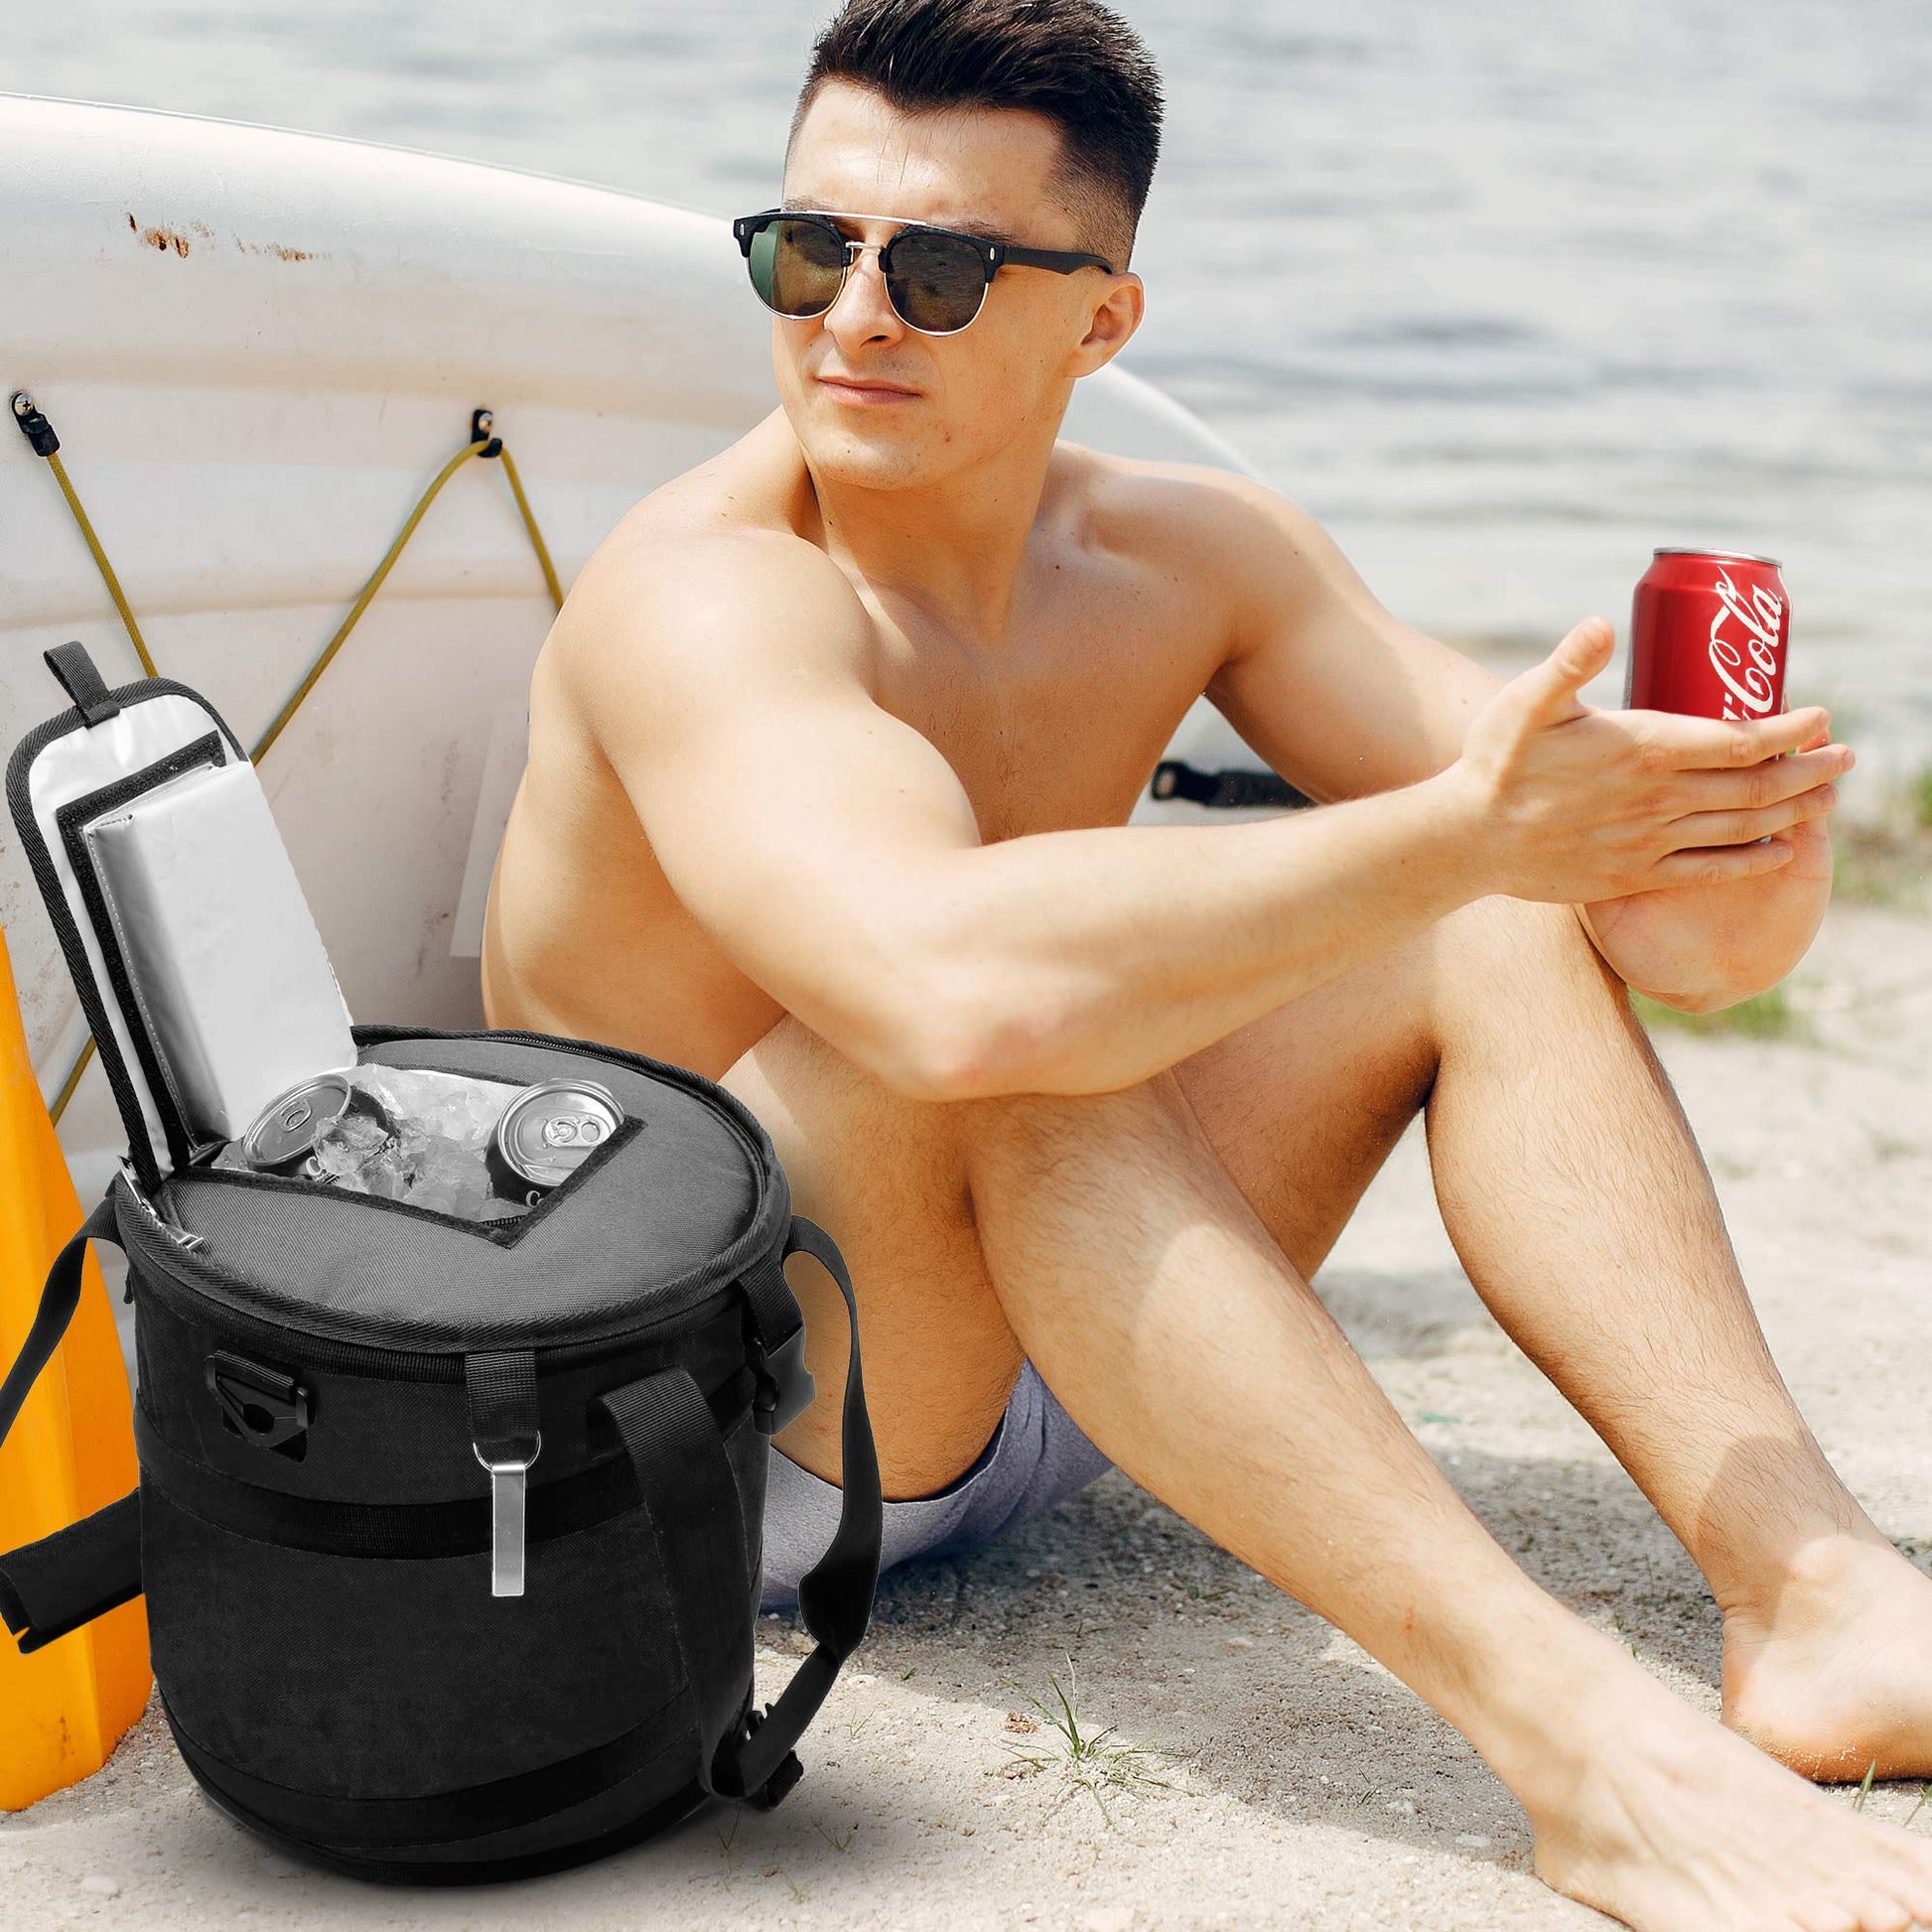 24 Can Pop Up Cooler Bag, Collapsible Insulated Tote with Shoulder Strap | Portable Heavy Duty Nylon Folding Ice Chest for Hiking, Camping, Travel, Picnic, BBQ | Window Flap & Bottle Opener (Black) - Opticdeals